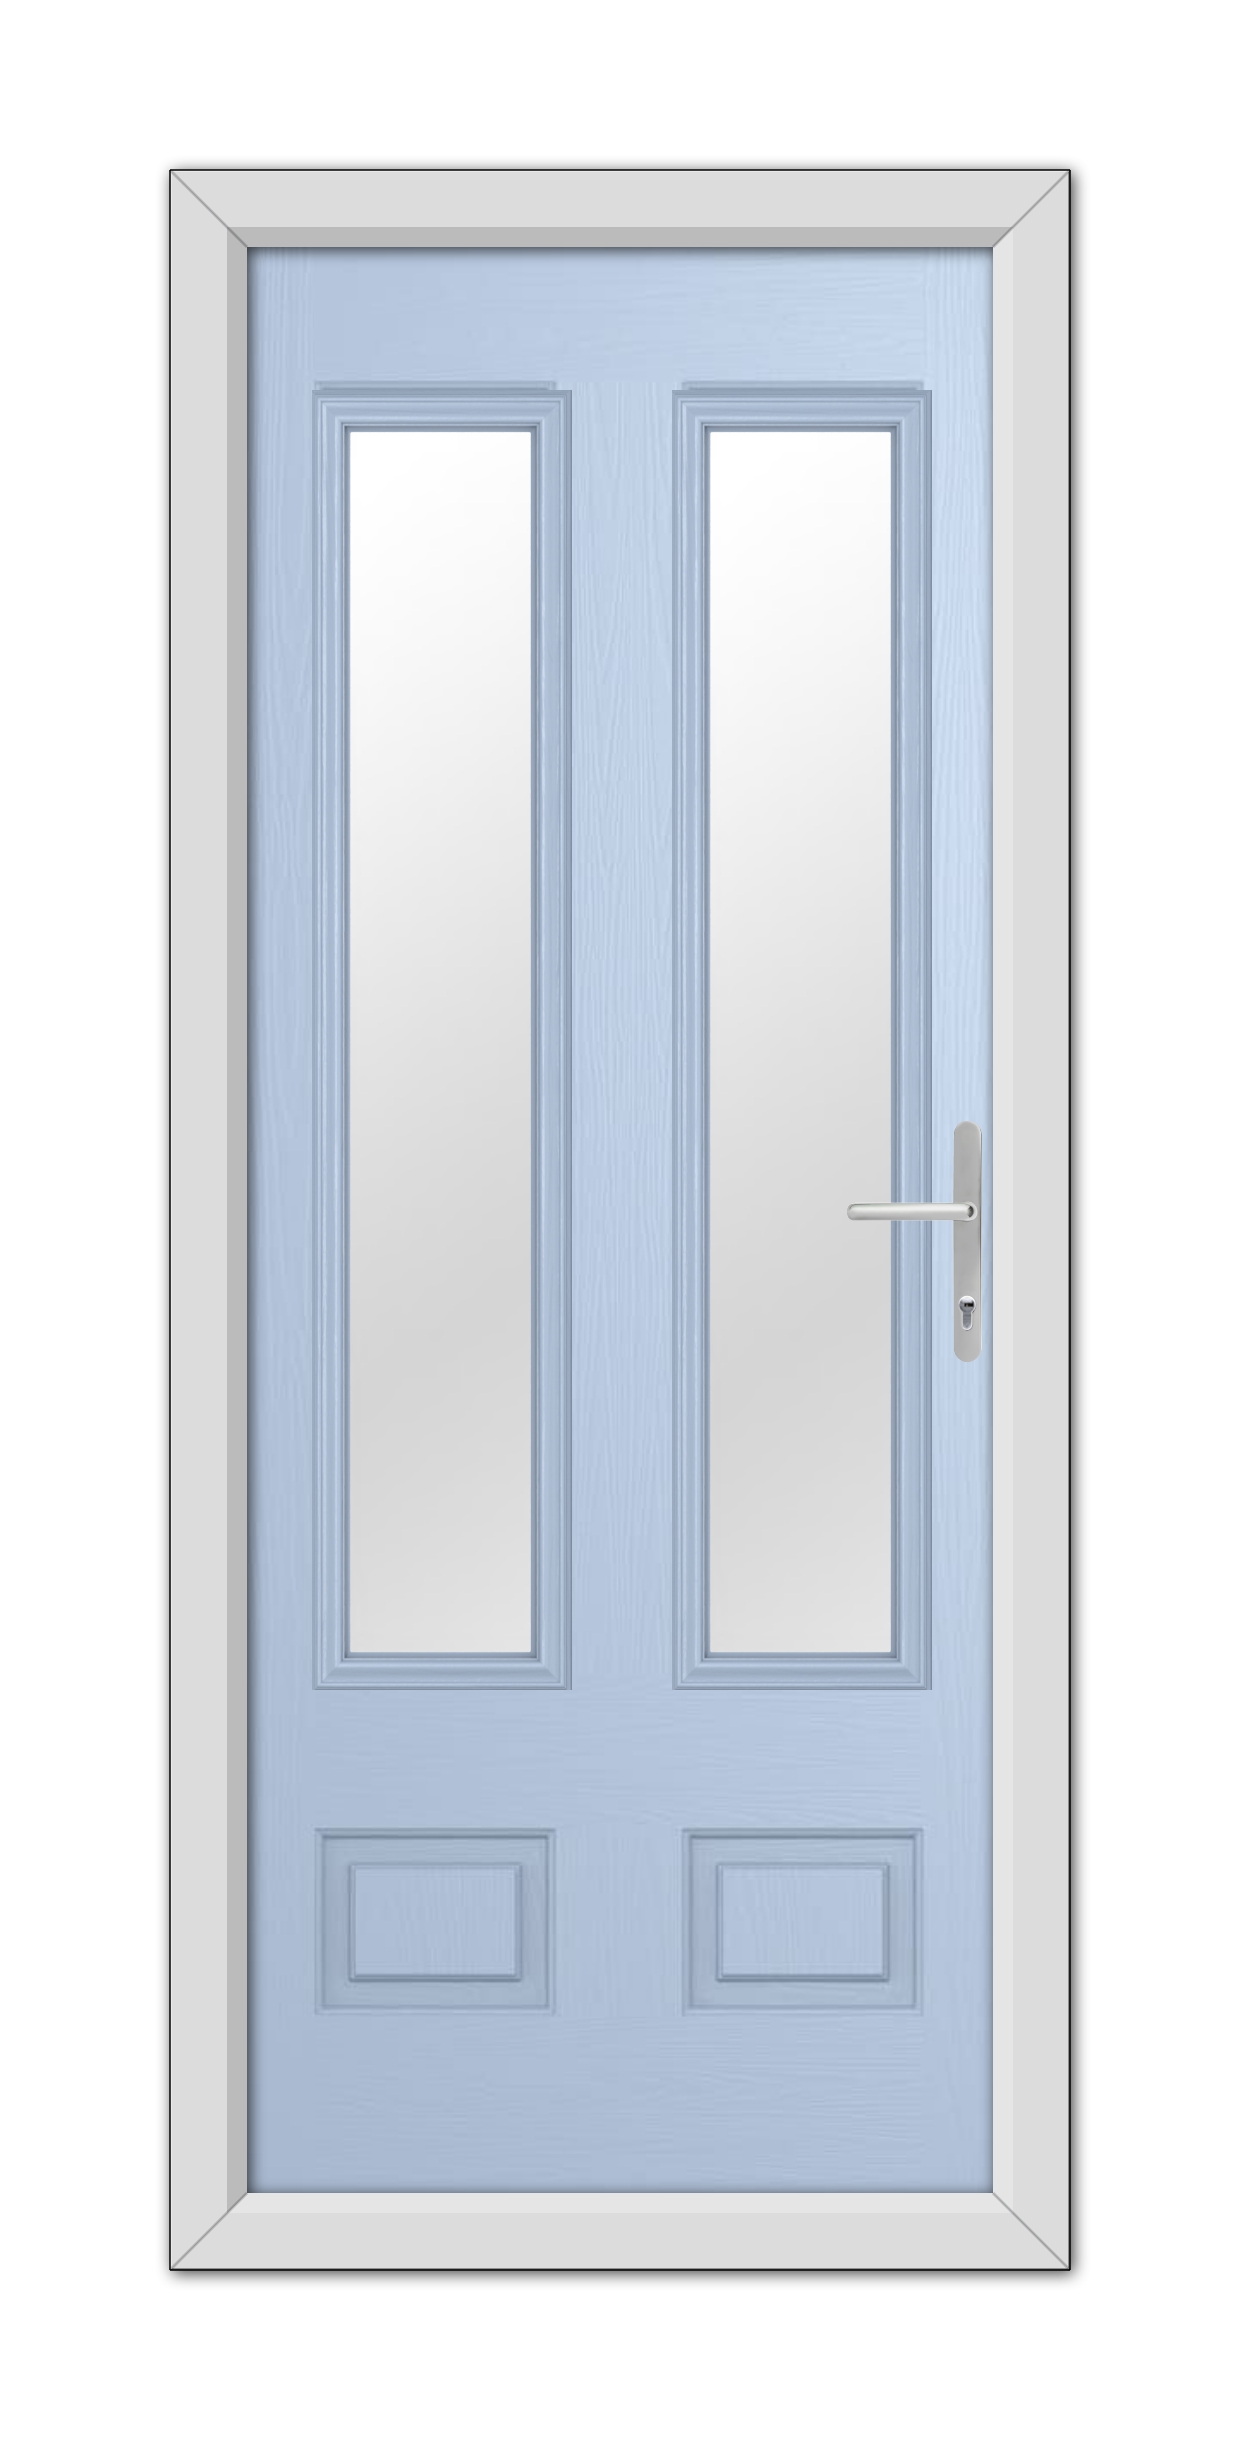 Double doors painted Duck Egg Blue Aston with rectangle glass panels at their center, a metallic handle on one door, and a white frame.